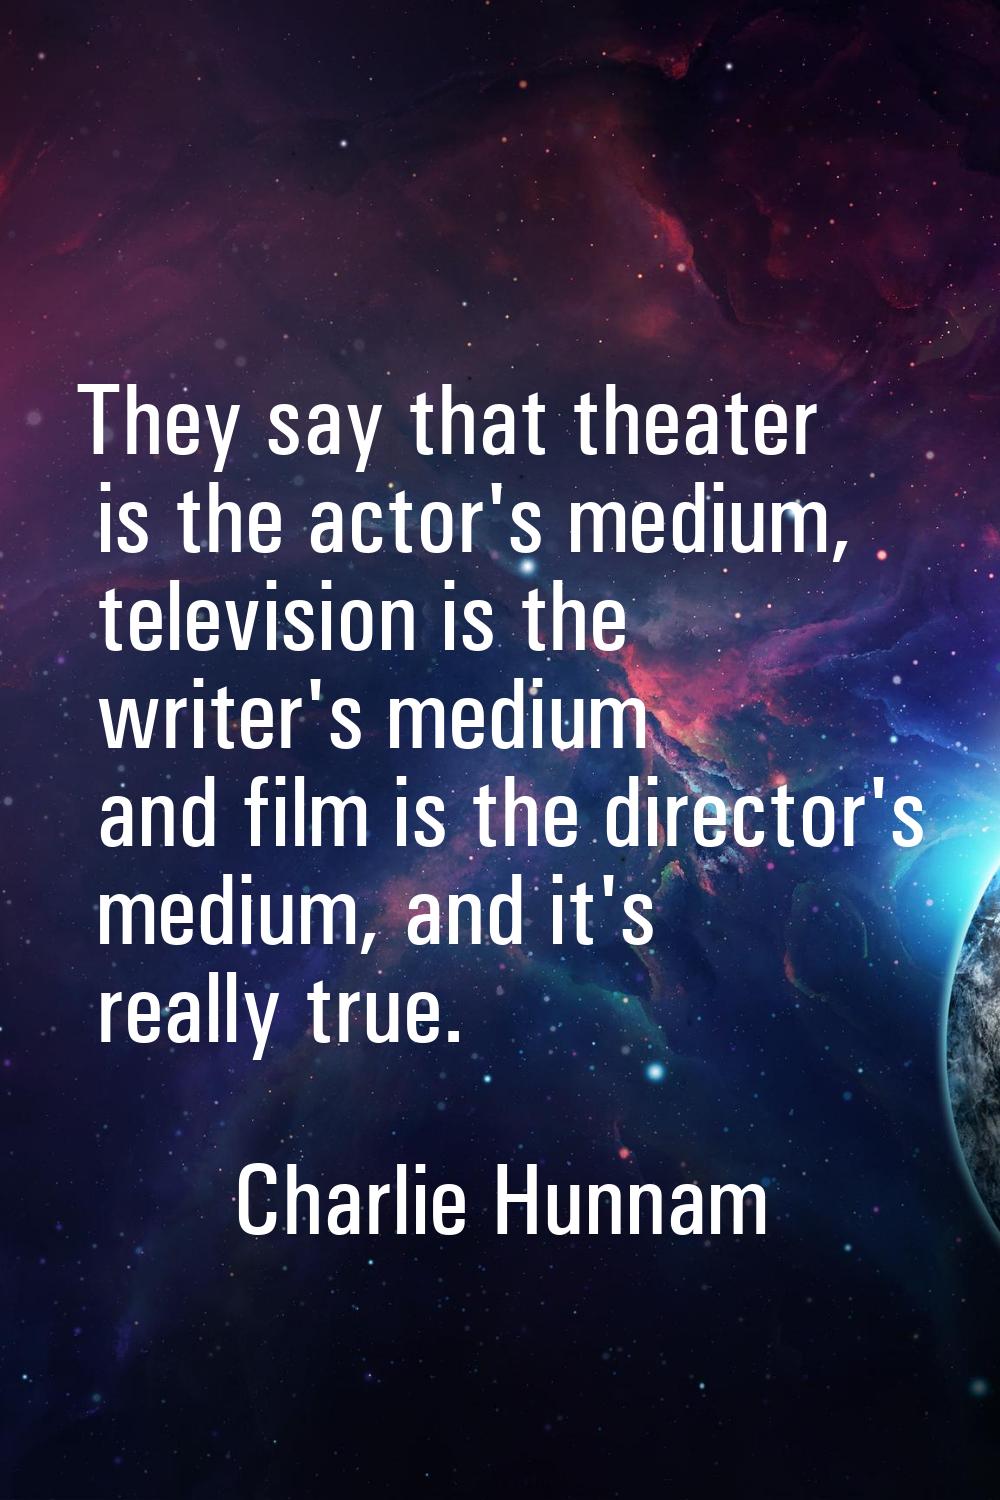 They say that theater is the actor's medium, television is the writer's medium and film is the dire